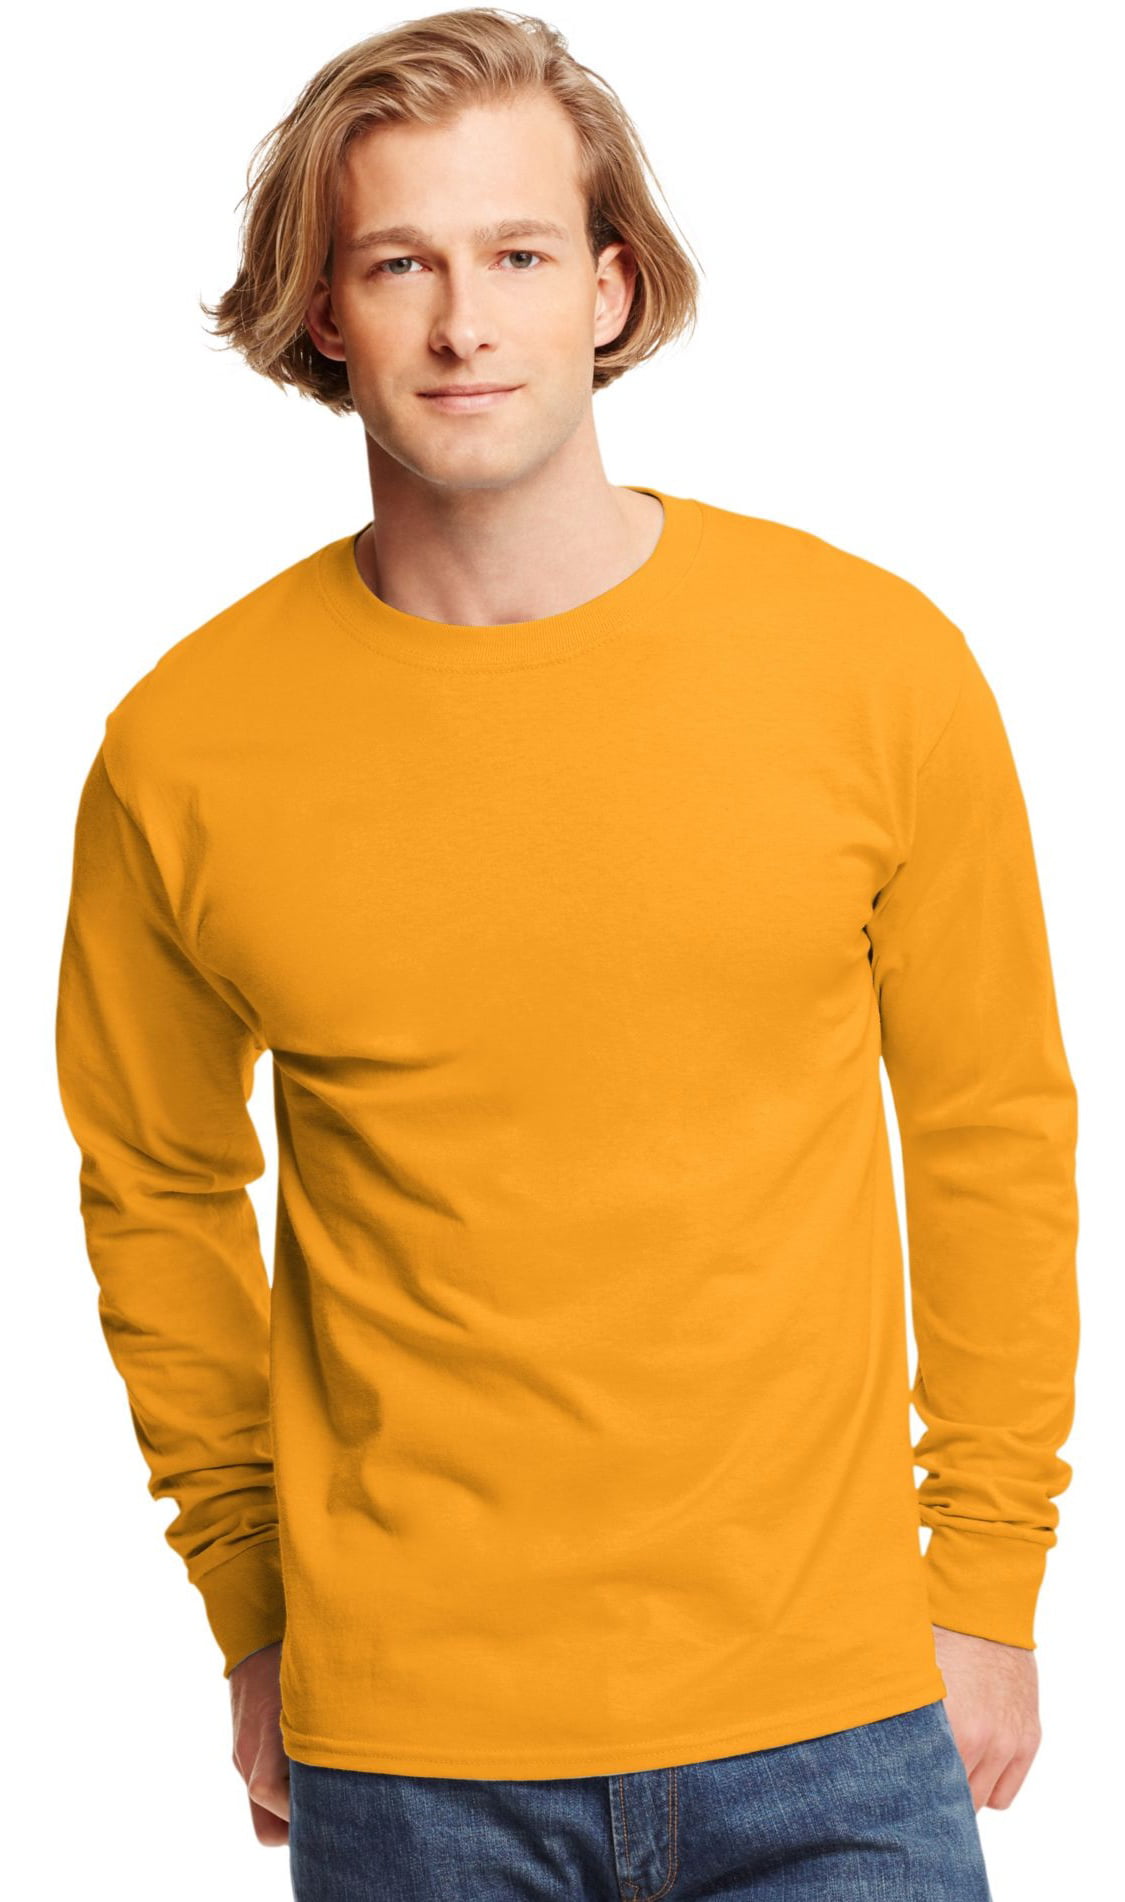 Hanes - 5586 Tagless Long-Sleeve T-Shirt Size 3 Extra Large, Gold ...